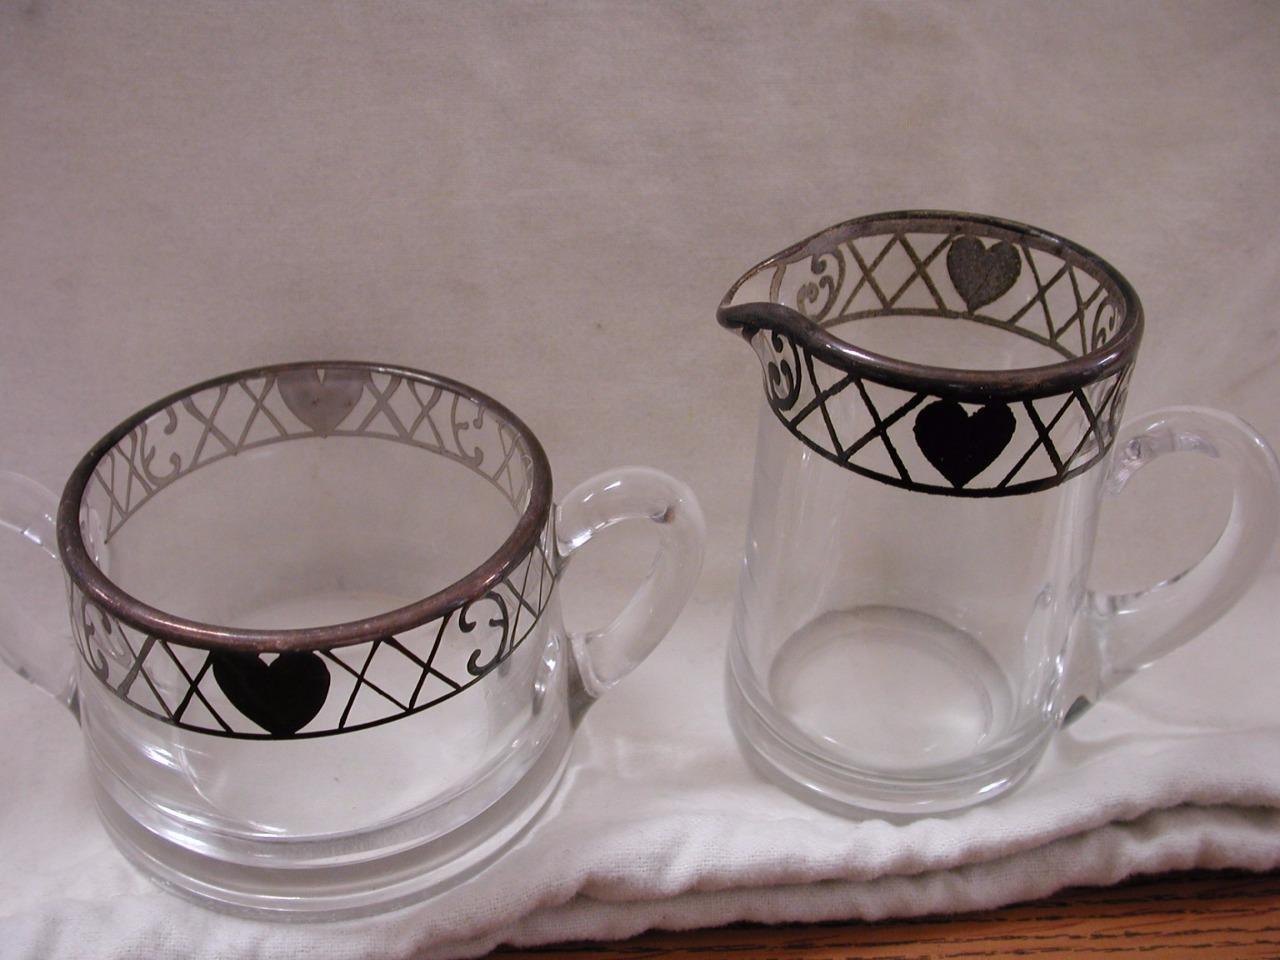 Heisey silver overlay sugar and creamer with painted hearts on rim sweet!